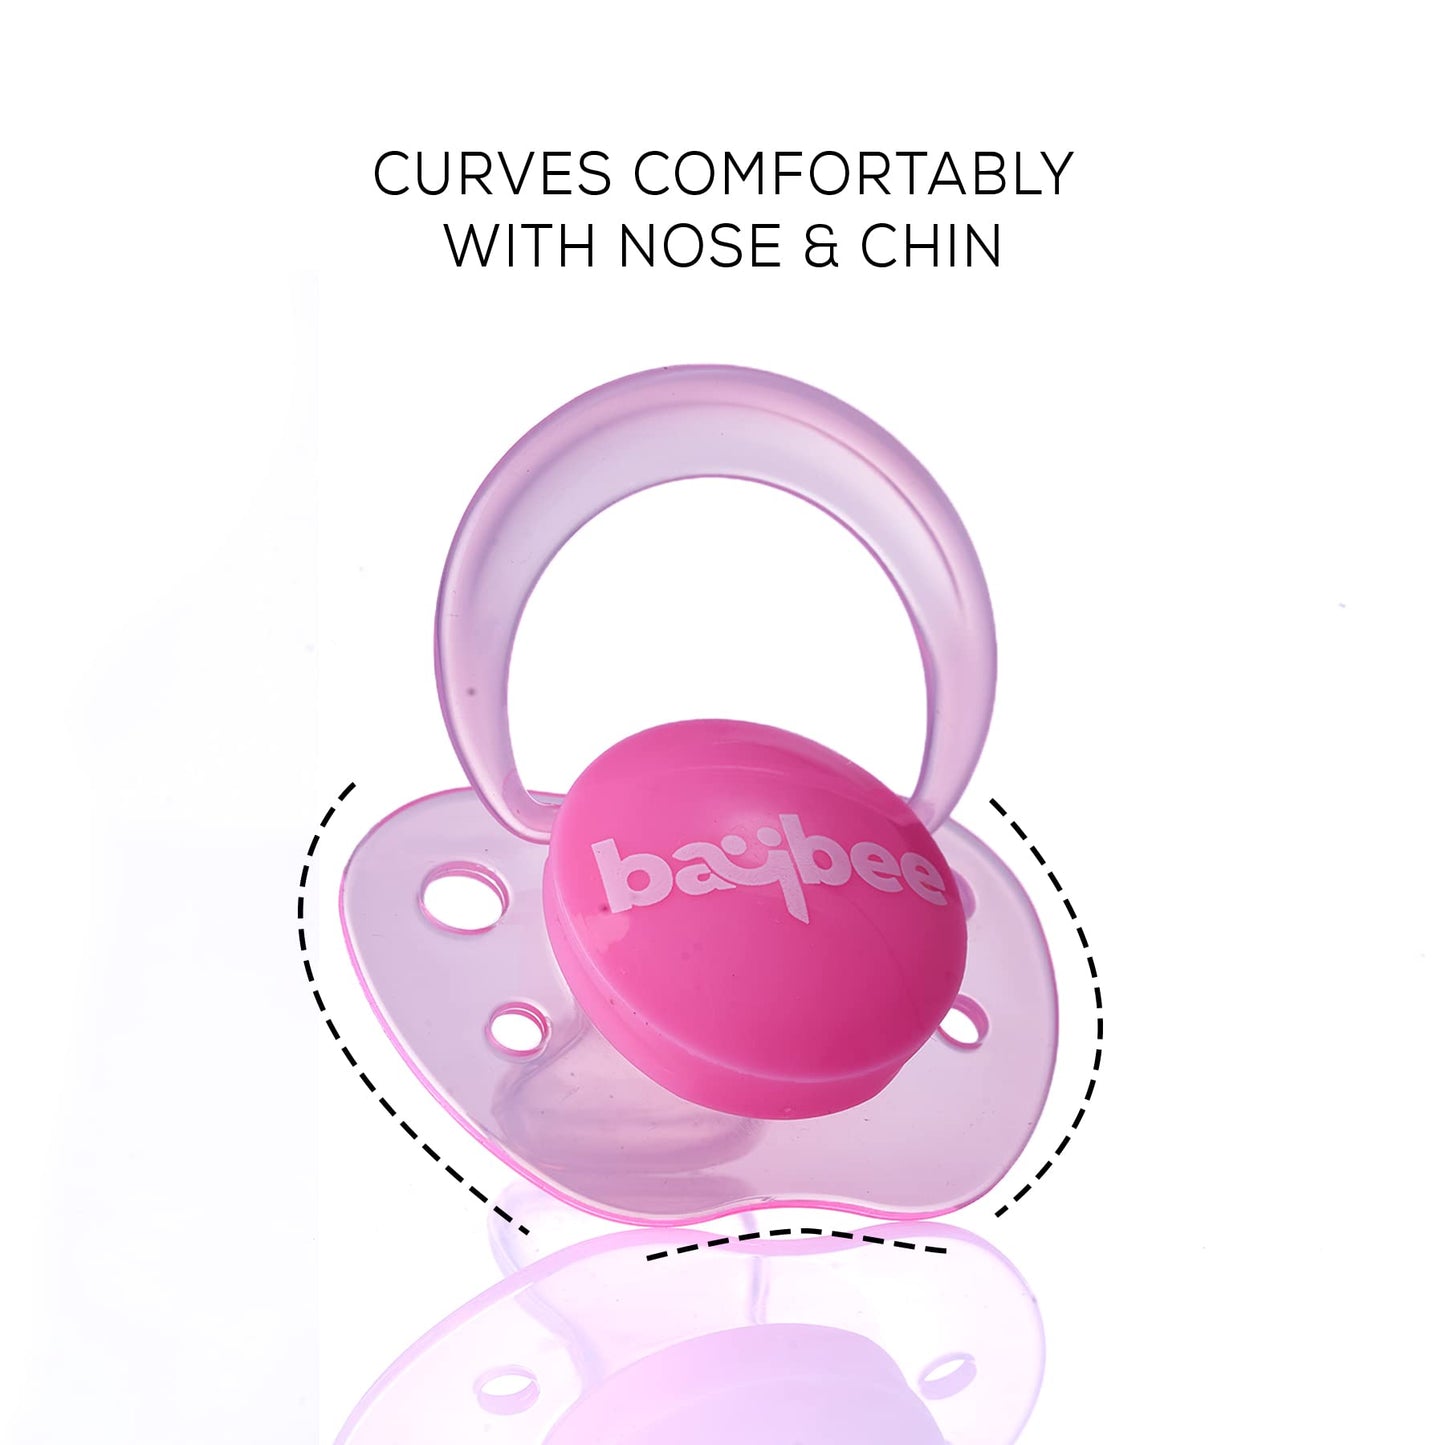 Baybee Baby Pacifier, Ultra Soft Silicone Pacifiers for Babies